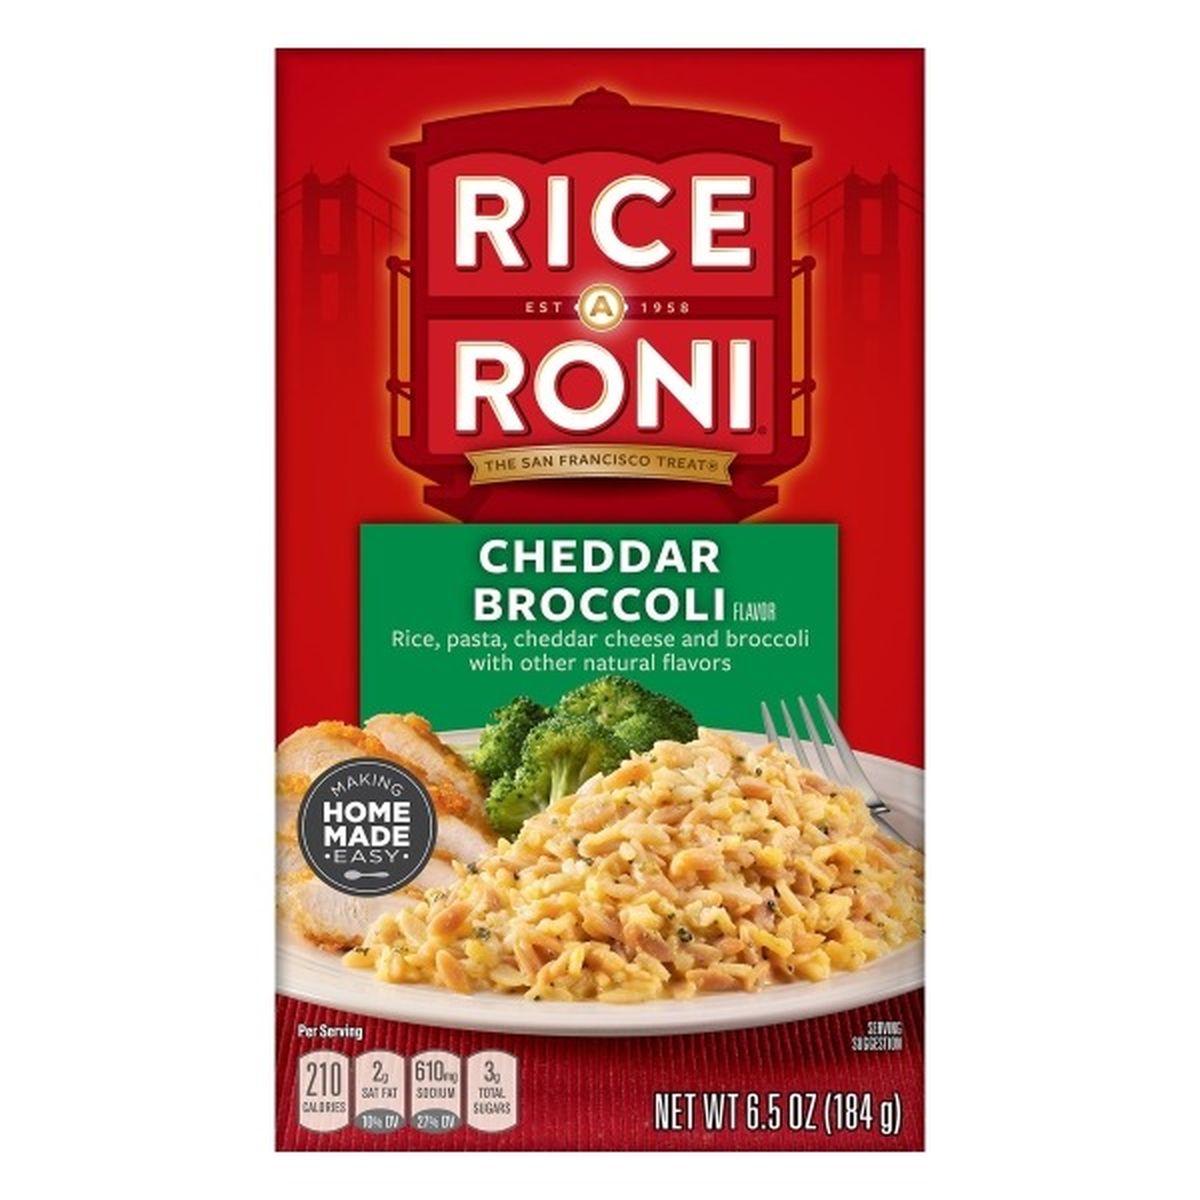 Calories in Rice-a-Roni Food Mix, Cheddar Broccoli Flavor